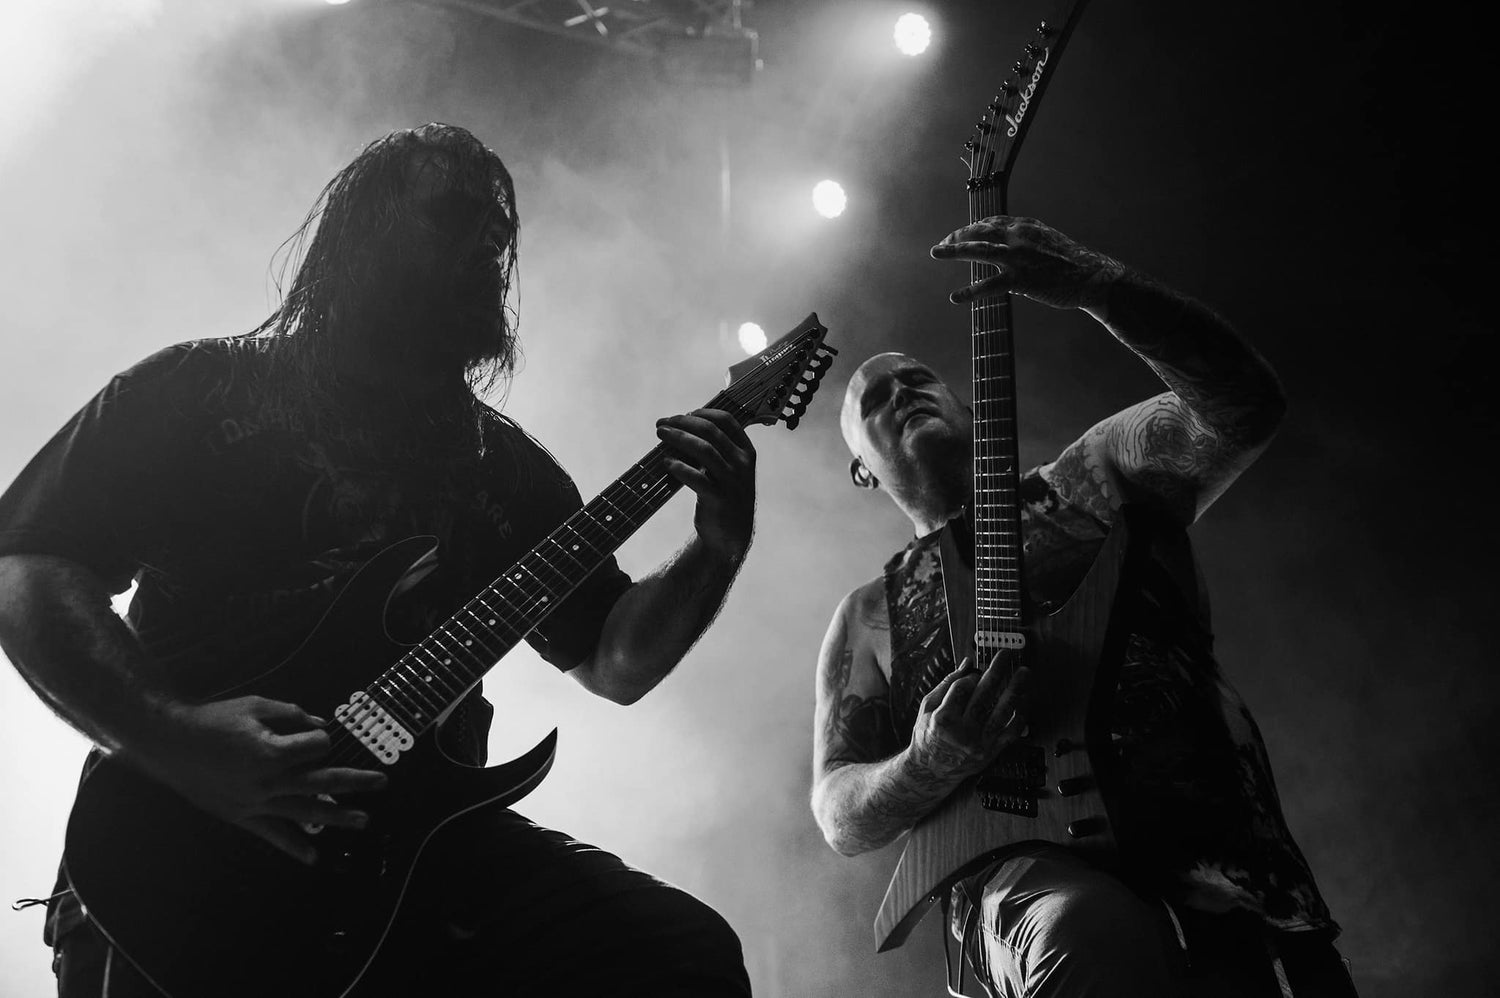 Pat Sheridan of Fit For An Autopsy discusses touring with heroes, the third wave of deathcore, and the greater community of extreme music